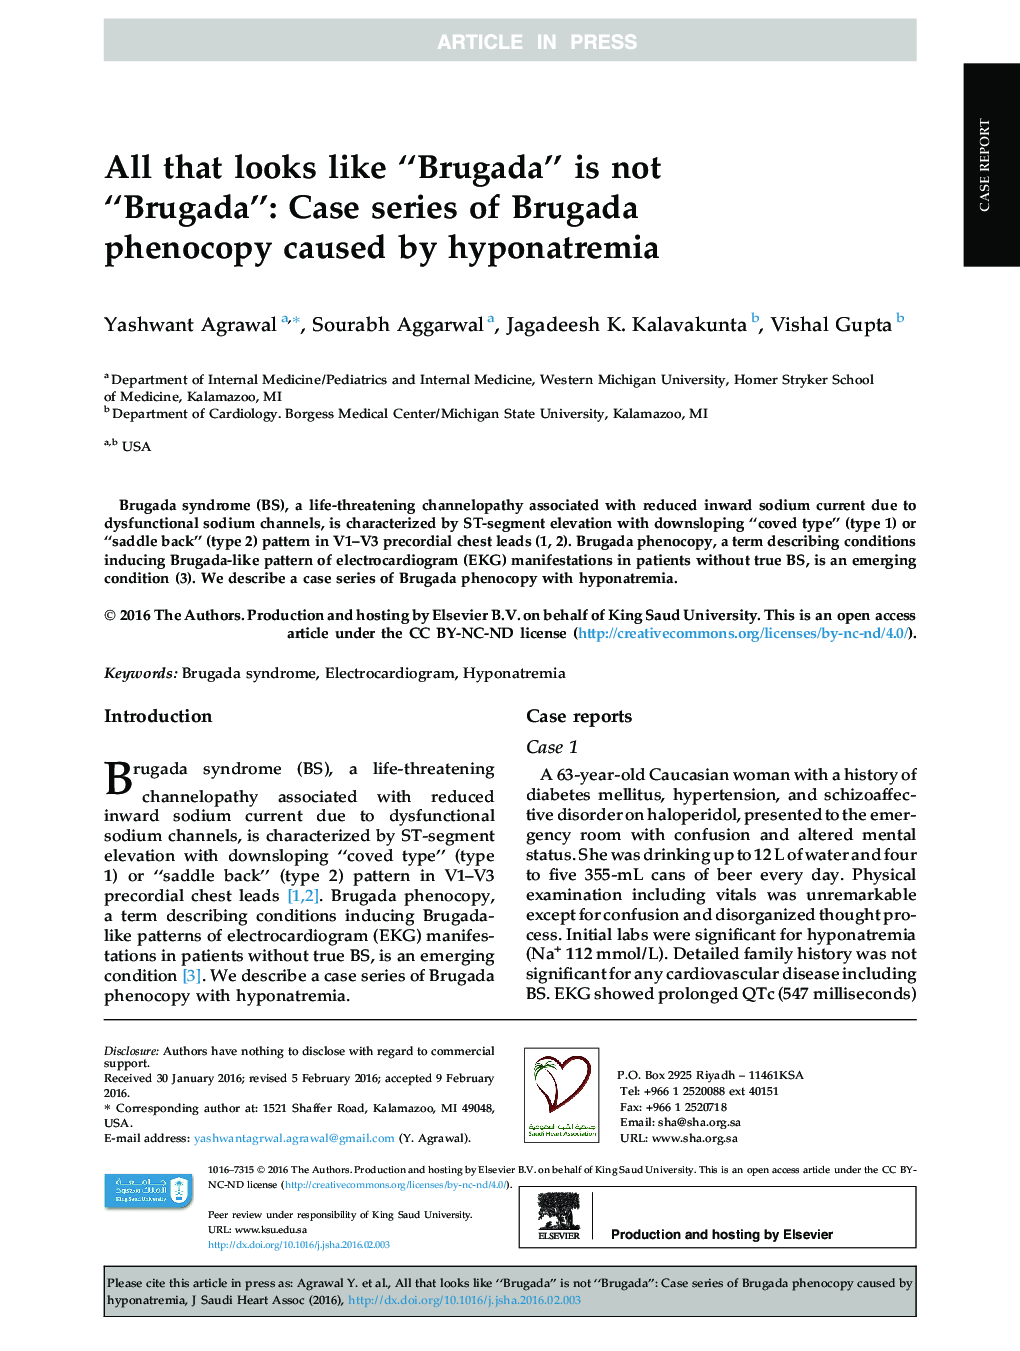 All that looks like “Brugada” is not “Brugada”: Case series of Brugada phenocopy caused by hyponatremia